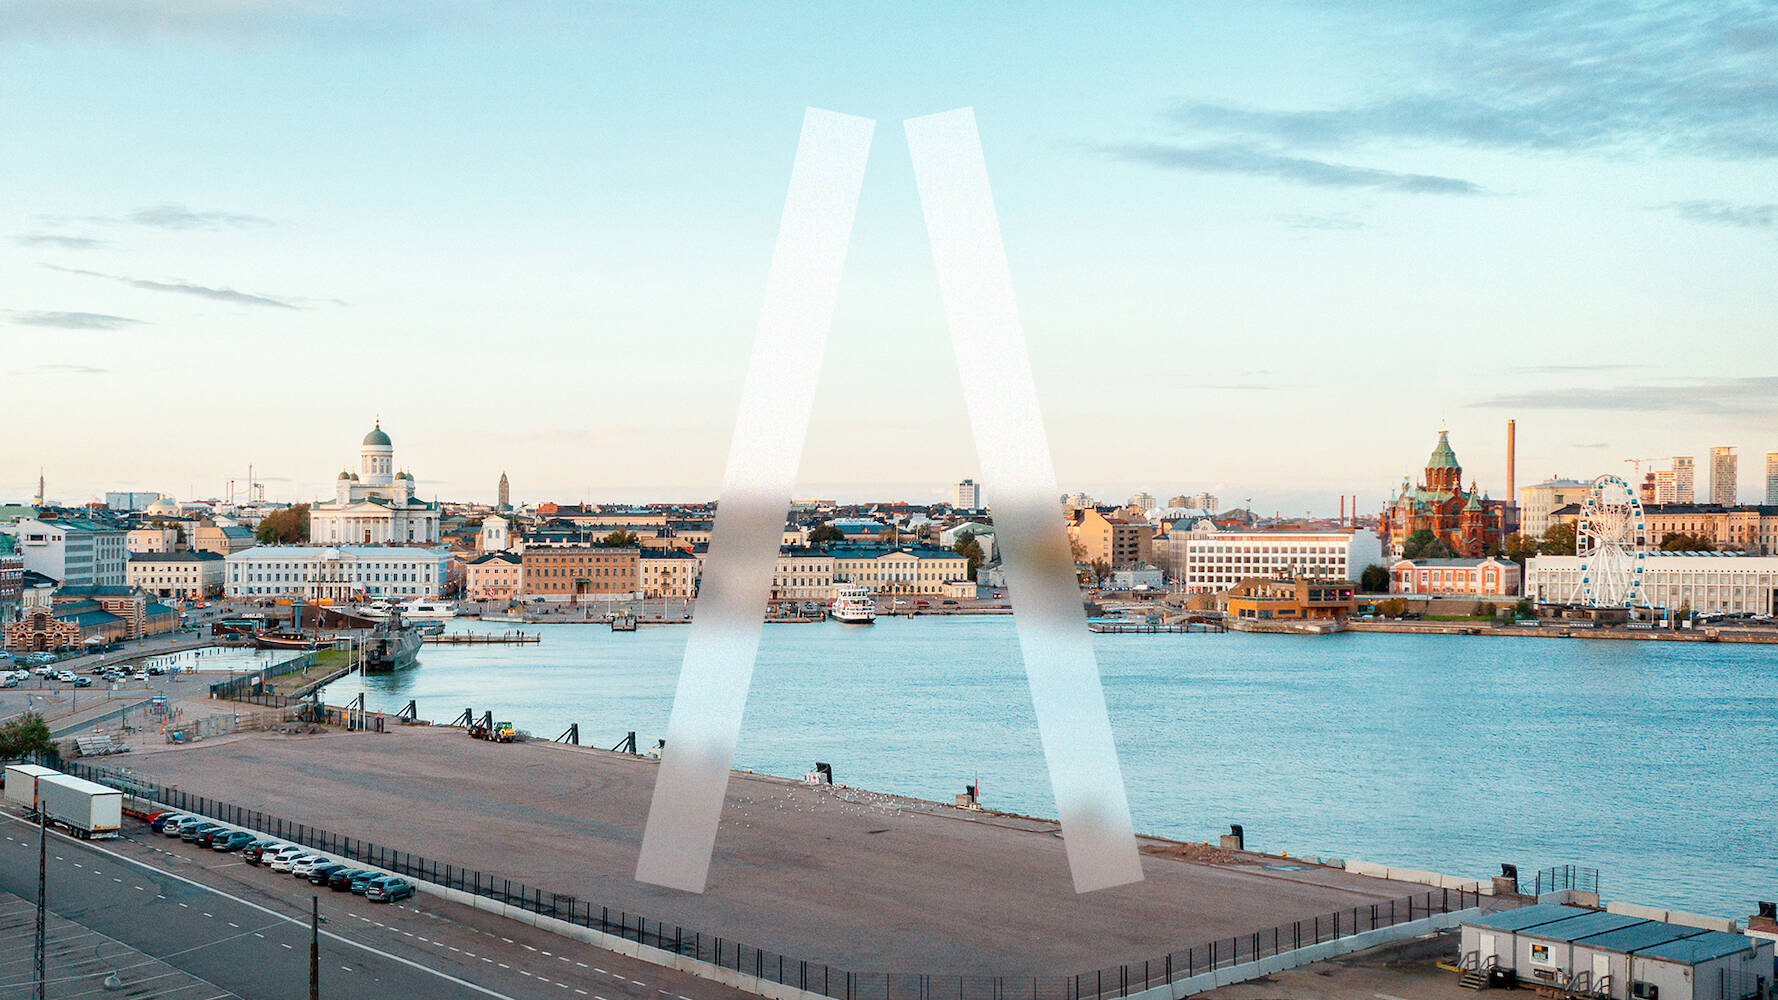 Design Competition Seeks Proposals for New Architecture and Design Museum on the Helsinki Waterfront